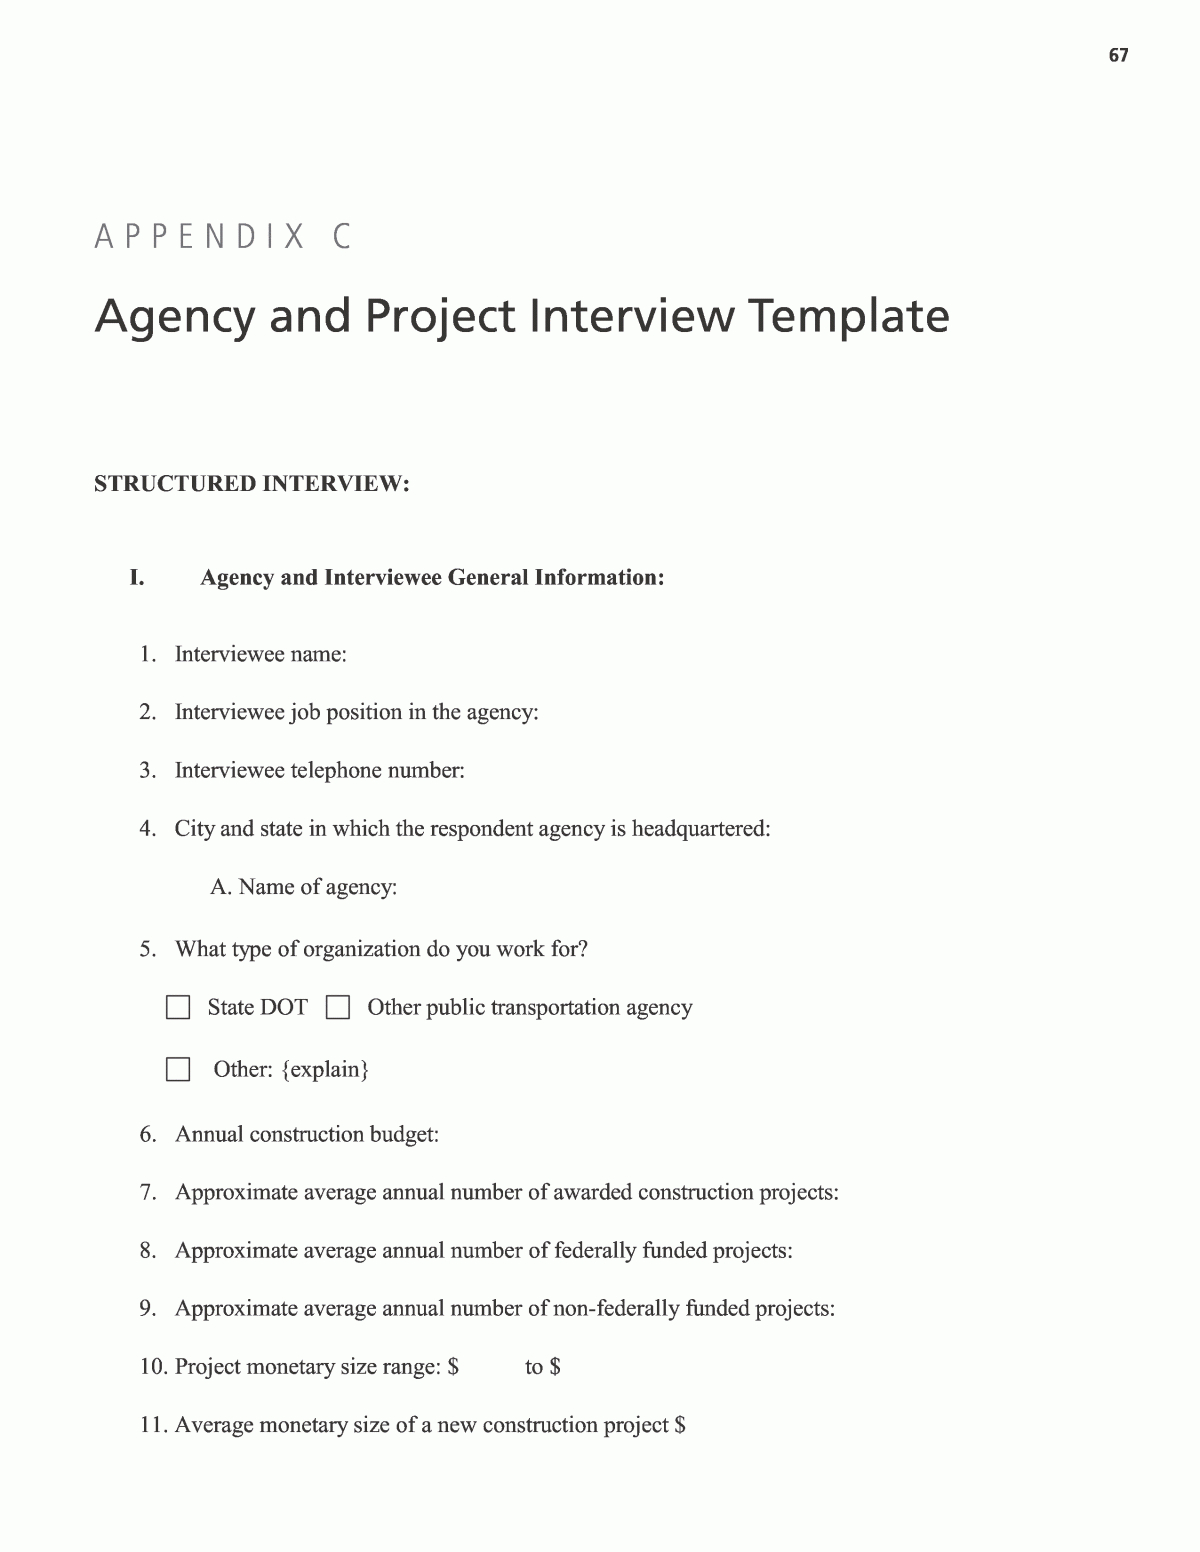 Appendix C - Agency And Project Interview Template Within Research Project Report Template